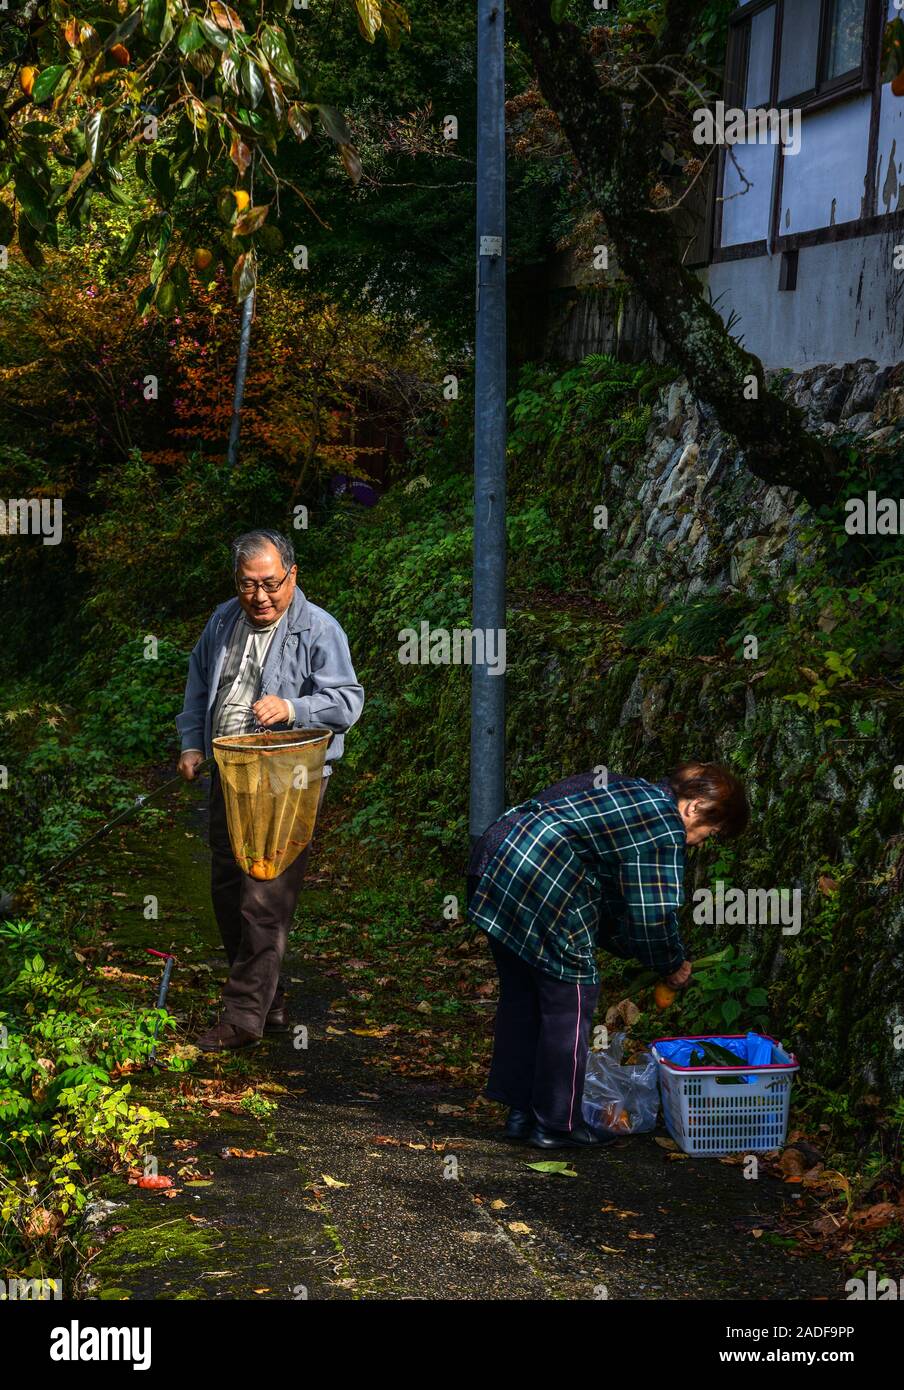 Kyoto, Japan - Nov 12, 2019. A senior couple picking persimmons from the tree at countryside of Kyoto, Japan. Stock Photo